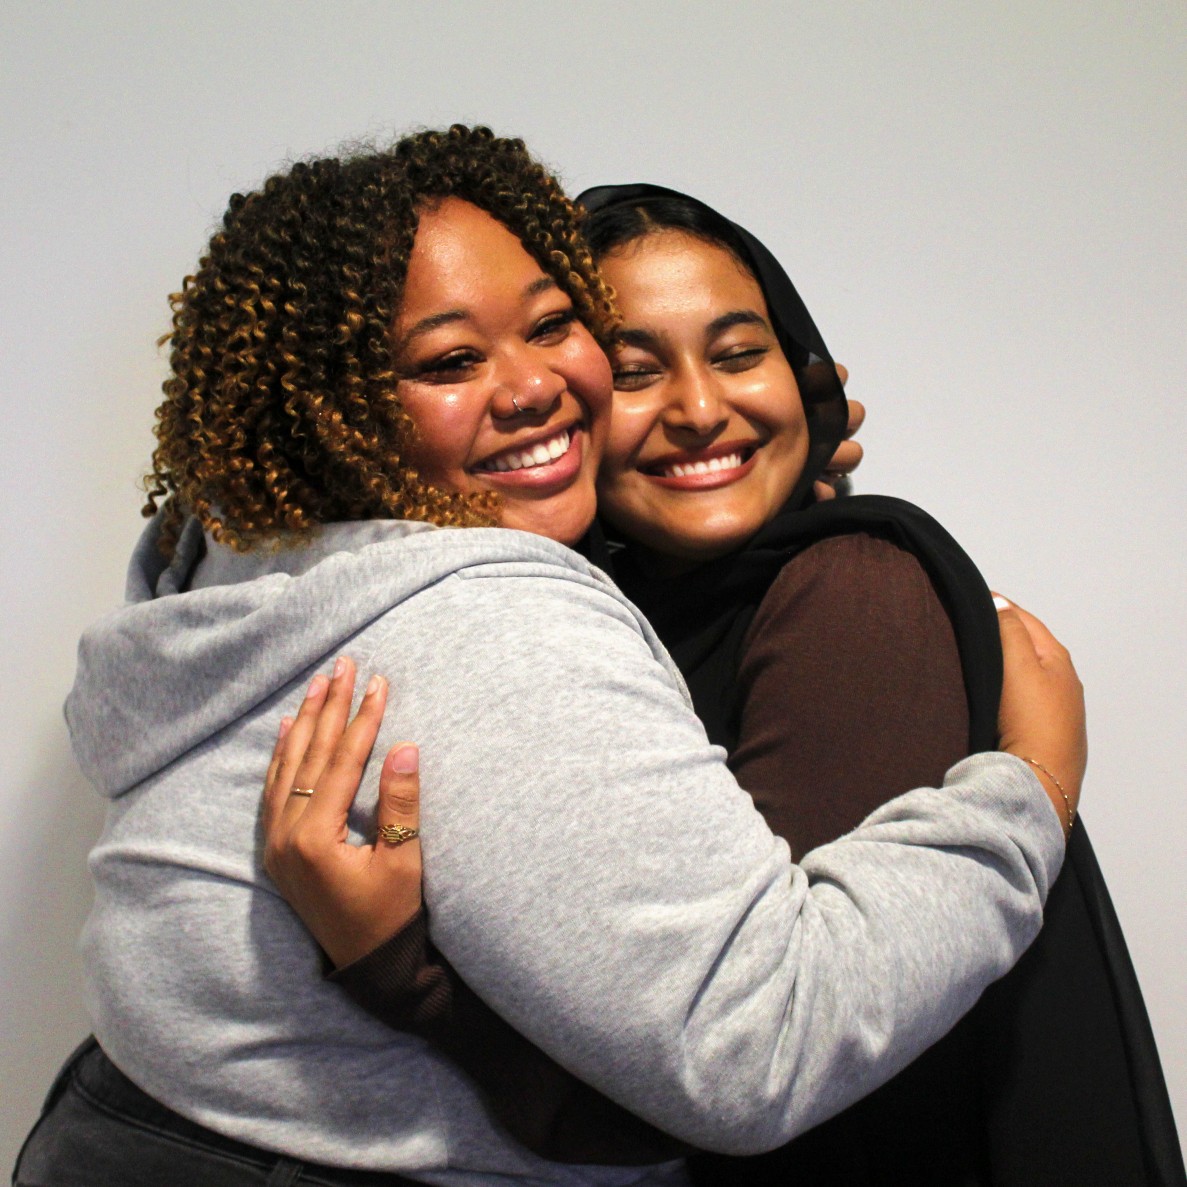 Yasmen Hassen (right) is a part of Roo Red, a group that advocates for free menstrual products on campus. Here she was able to grow her digital marketing and leadership skills.